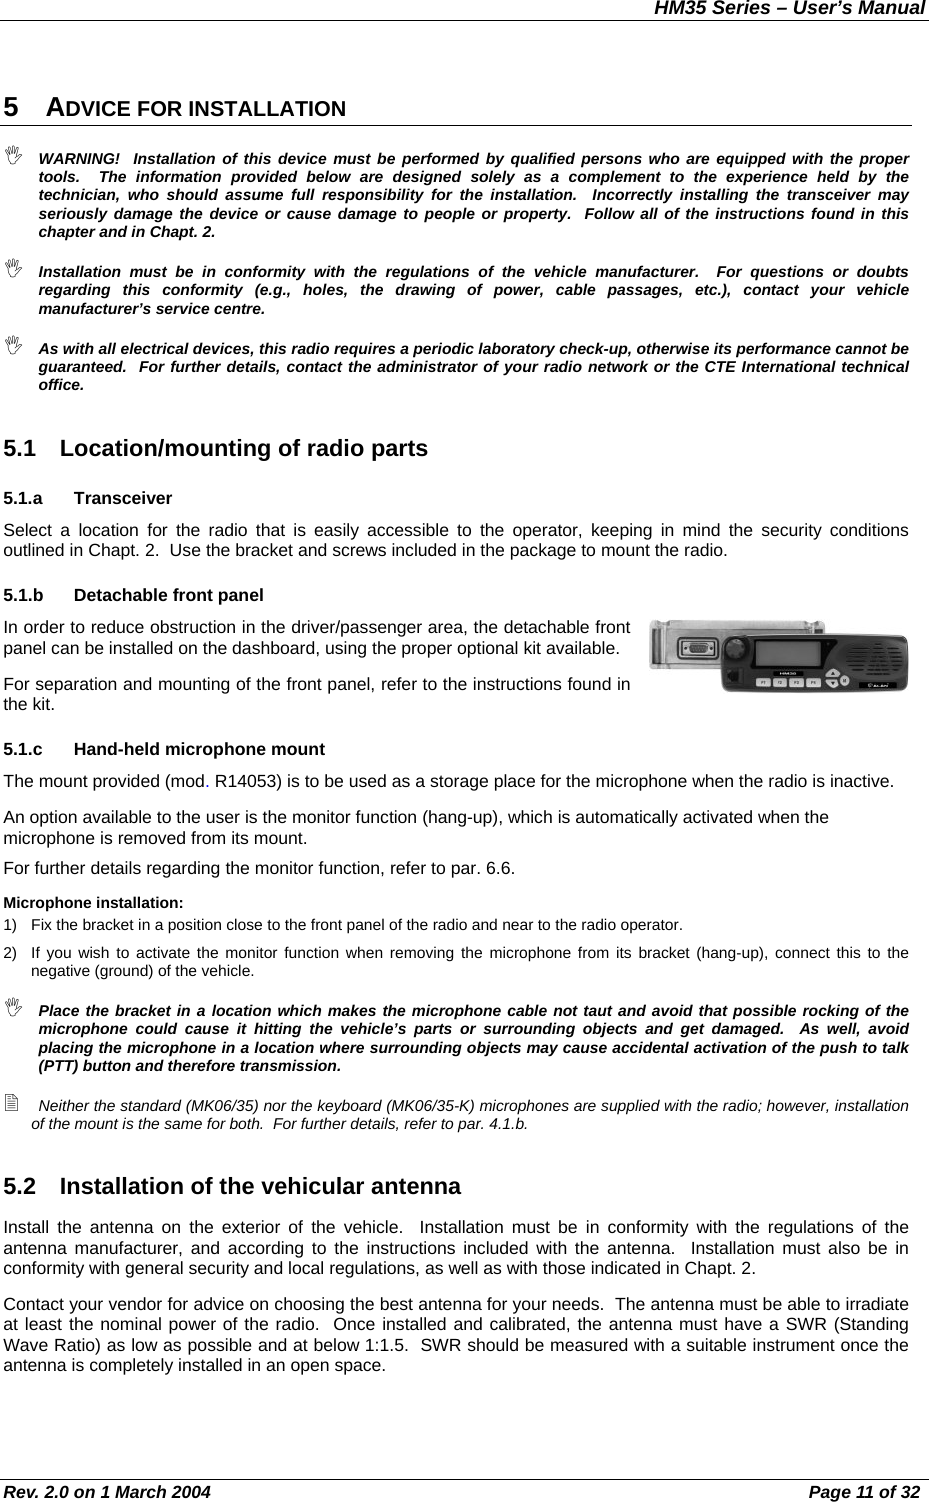 HM35 Series – User’s Manual Rev. 2.0 on 1 March 2004  Page 11 of 32 5 ADVICE FOR INSTALLATION  WARNING!  Installation of this device must be performed by qualified persons who are equipped with the proper tools.  The information provided below are designed solely as a complement to the experience held by the technician, who should assume full responsibility for the installation.  Incorrectly installing the transceiver may seriously damage the device or cause damage to people or property.  Follow all of the instructions found in this chapter and in Chapt. 2.  Installation must be in conformity with the regulations of the vehicle manufacturer.  For questions or doubts regarding this conformity (e.g., holes, the drawing of power, cable passages, etc.), contact your vehicle manufacturer’s service centre.  As with all electrical devices, this radio requires a periodic laboratory check-up, otherwise its performance cannot be guaranteed.  For further details, contact the administrator of your radio network or the CTE International technical office. 5.1  Location/mounting of radio parts 5.1.a Transceiver Select a location for the radio that is easily accessible to the operator, keeping in mind the security conditions outlined in Chapt. 2.  Use the bracket and screws included in the package to mount the radio. 5.1.b Detachable front panel In order to reduce obstruction in the driver/passenger area, the detachable front panel can be installed on the dashboard, using the proper optional kit available. For separation and mounting of the front panel, refer to the instructions found in the kit. 5.1.c Hand-held microphone mount The mount provided (mod. R14053) is to be used as a storage place for the microphone when the radio is inactive. An option available to the user is the monitor function (hang-up), which is automatically activated when the microphone is removed from its mount. For further details regarding the monitor function, refer to par. 6.6. Microphone installation: 1)  Fix the bracket in a position close to the front panel of the radio and near to the radio operator. 2)  If you wish to activate the monitor function when removing the microphone from its bracket (hang-up), connect this to the negative (ground) of the vehicle.  Place the bracket in a location which makes the microphone cable not taut and avoid that possible rocking of the microphone could cause it hitting the vehicle’s parts or surrounding objects and get damaged.  As well, avoid placing the microphone in a location where surrounding objects may cause accidental activation of the push to talk (PTT) button and therefore transmission.  Neither the standard (MK06/35) nor the keyboard (MK06/35-K) microphones are supplied with the radio; however, installation of the mount is the same for both.  For further details, refer to par. 4.1.b. 5.2  Installation of the vehicular antenna Install the antenna on the exterior of the vehicle.  Installation must be in conformity with the regulations of the antenna manufacturer, and according to the instructions included with the antenna.  Installation must also be in conformity with general security and local regulations, as well as with those indicated in Chapt. 2. Contact your vendor for advice on choosing the best antenna for your needs.  The antenna must be able to irradiate at least the nominal power of the radio.  Once installed and calibrated, the antenna must have a SWR (Standing Wave Ratio) as low as possible and at below 1:1.5.  SWR should be measured with a suitable instrument once the antenna is completely installed in an open space. 